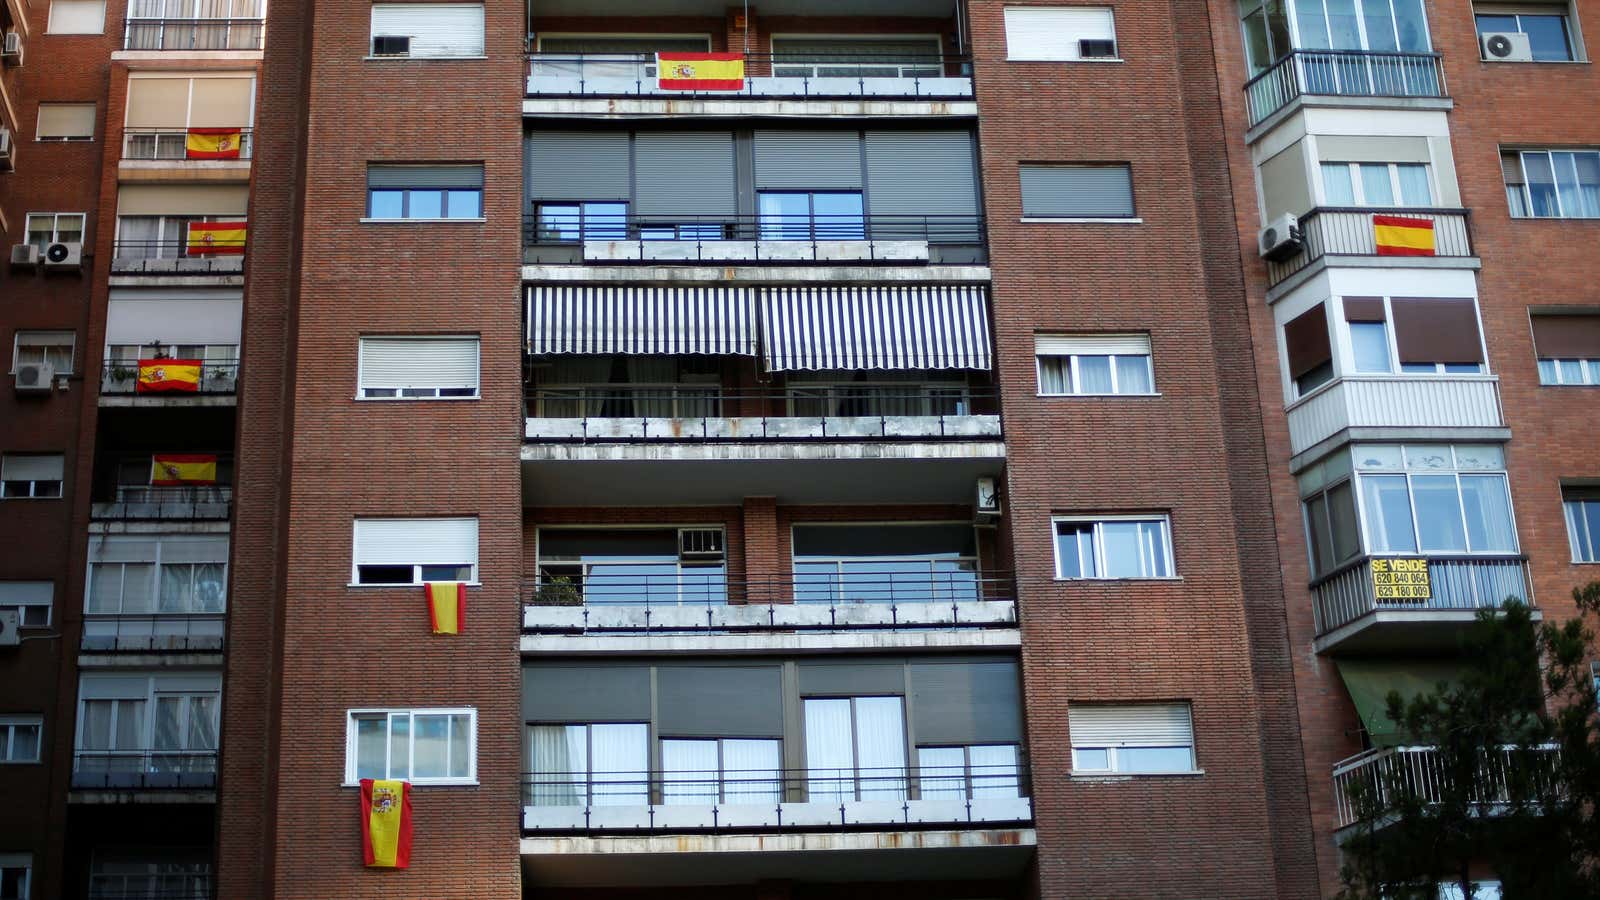 Renting an apartment in Spain is tough. Will rent control make it better?